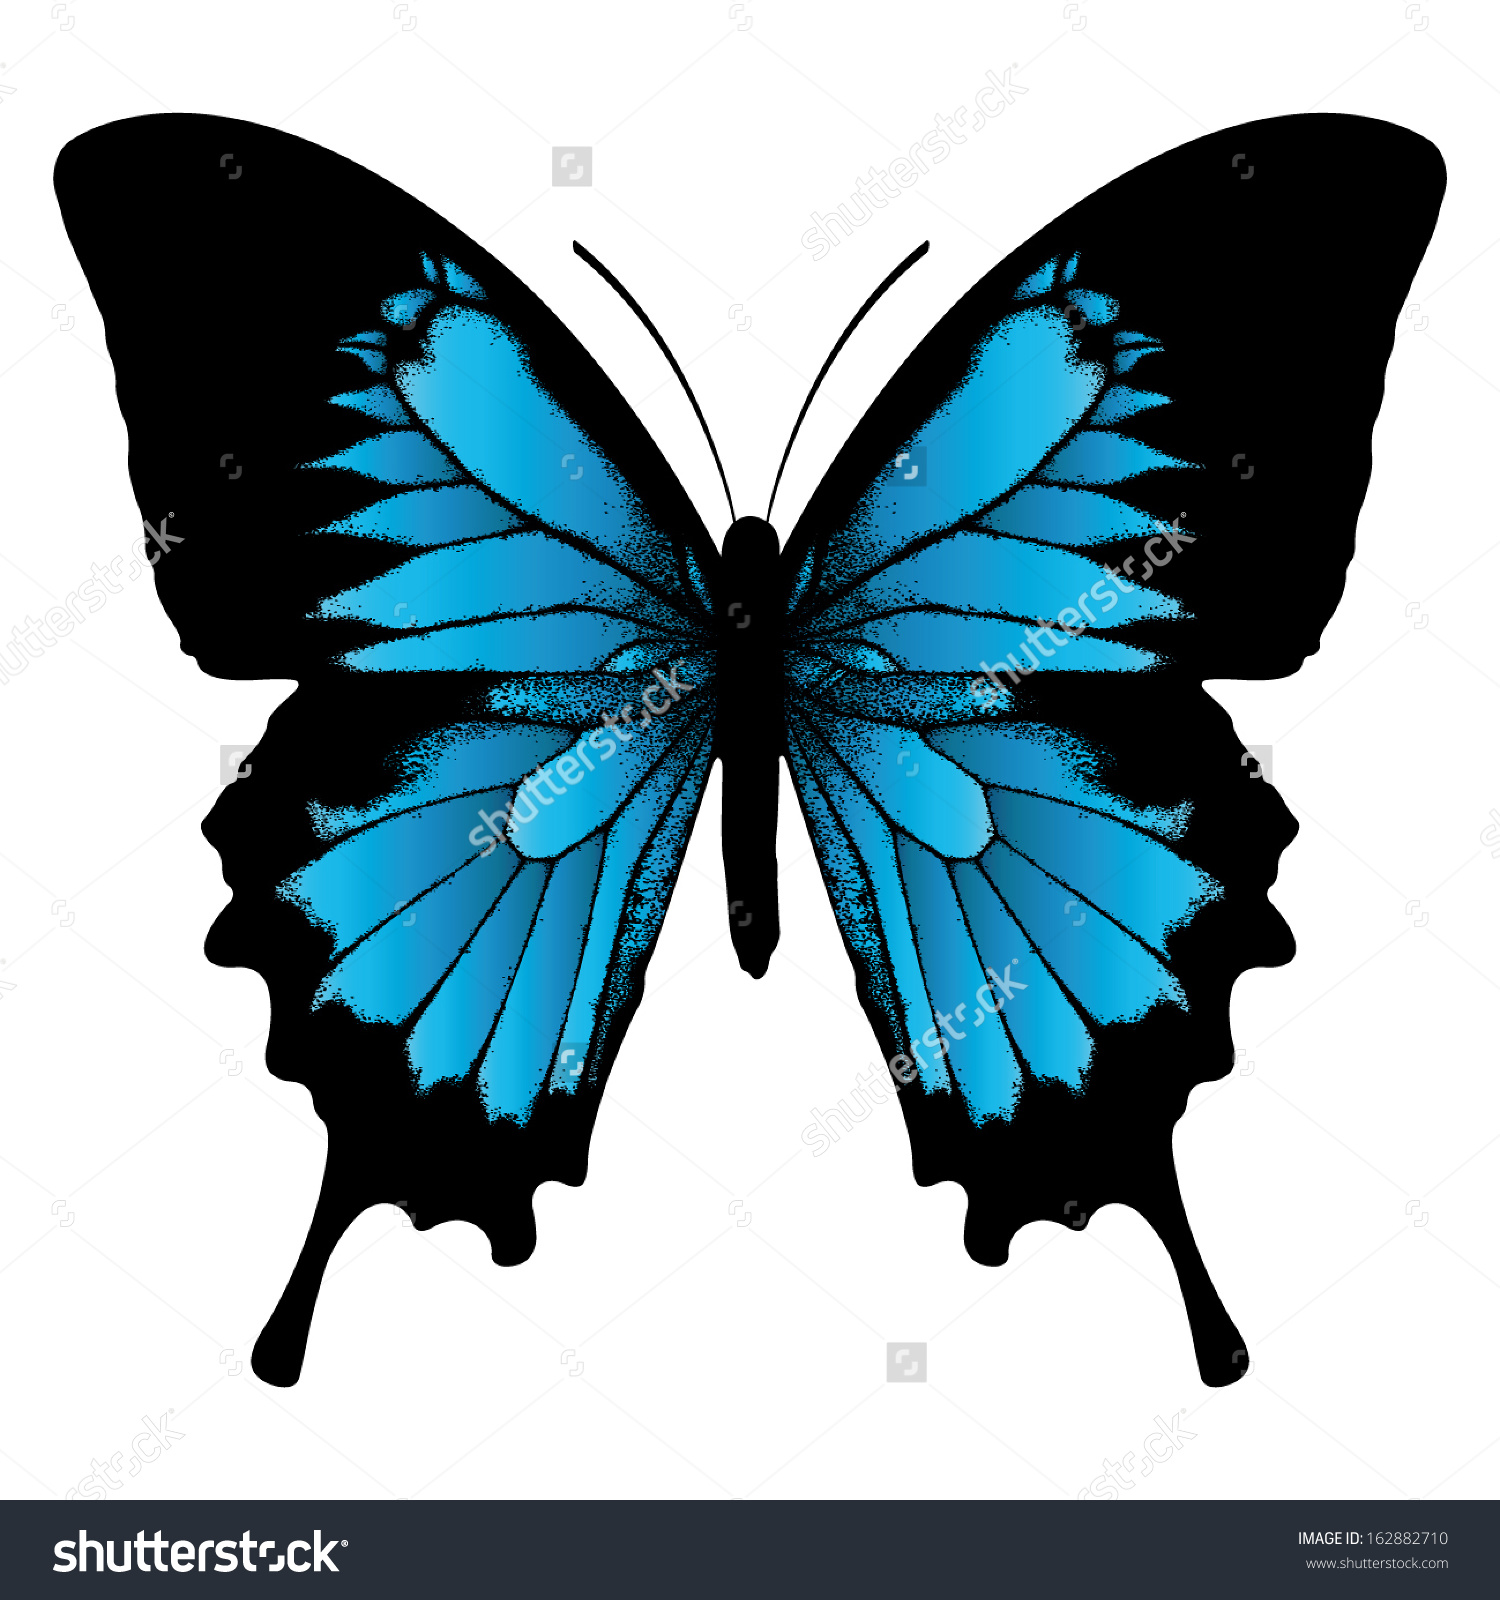 HQ Ulysses Butterfly Wallpapers | File 574.21Kb